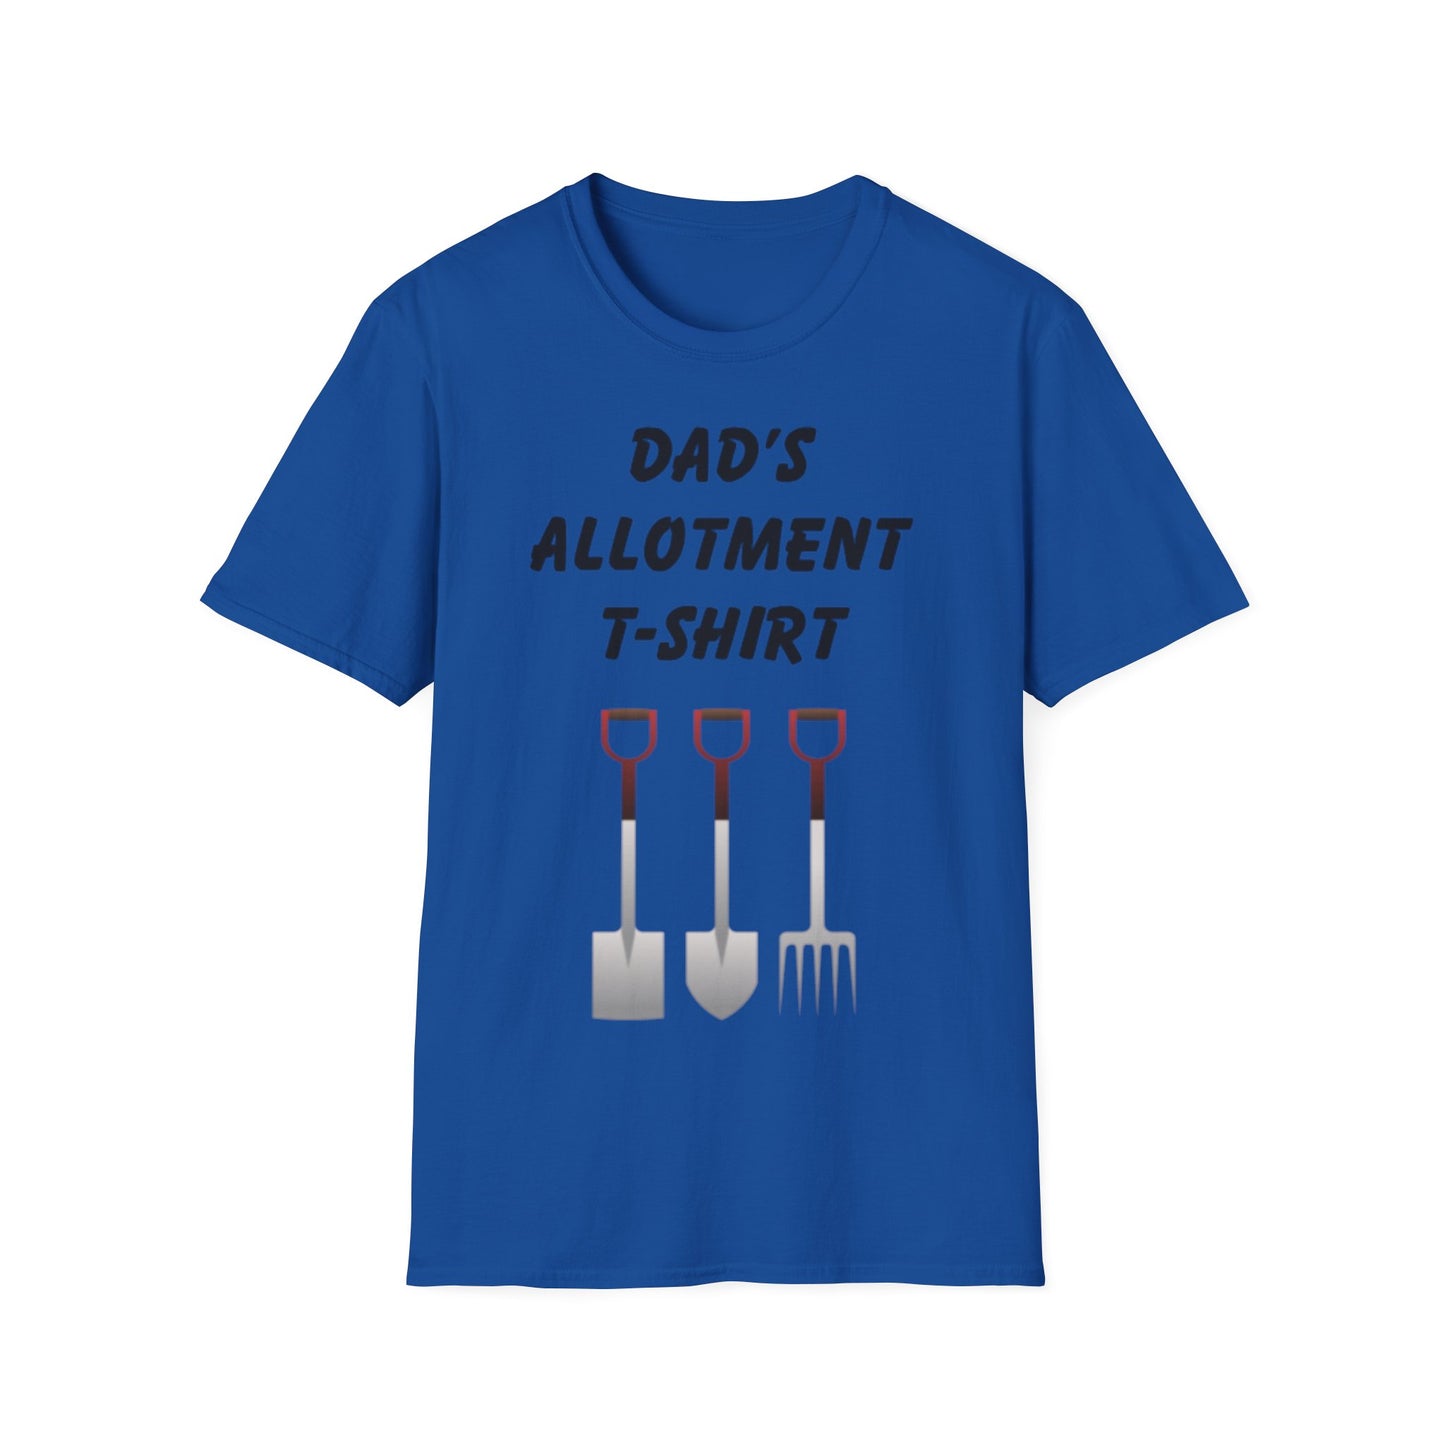 Dad's Allotment T-shirt Father's Day T-Shirt